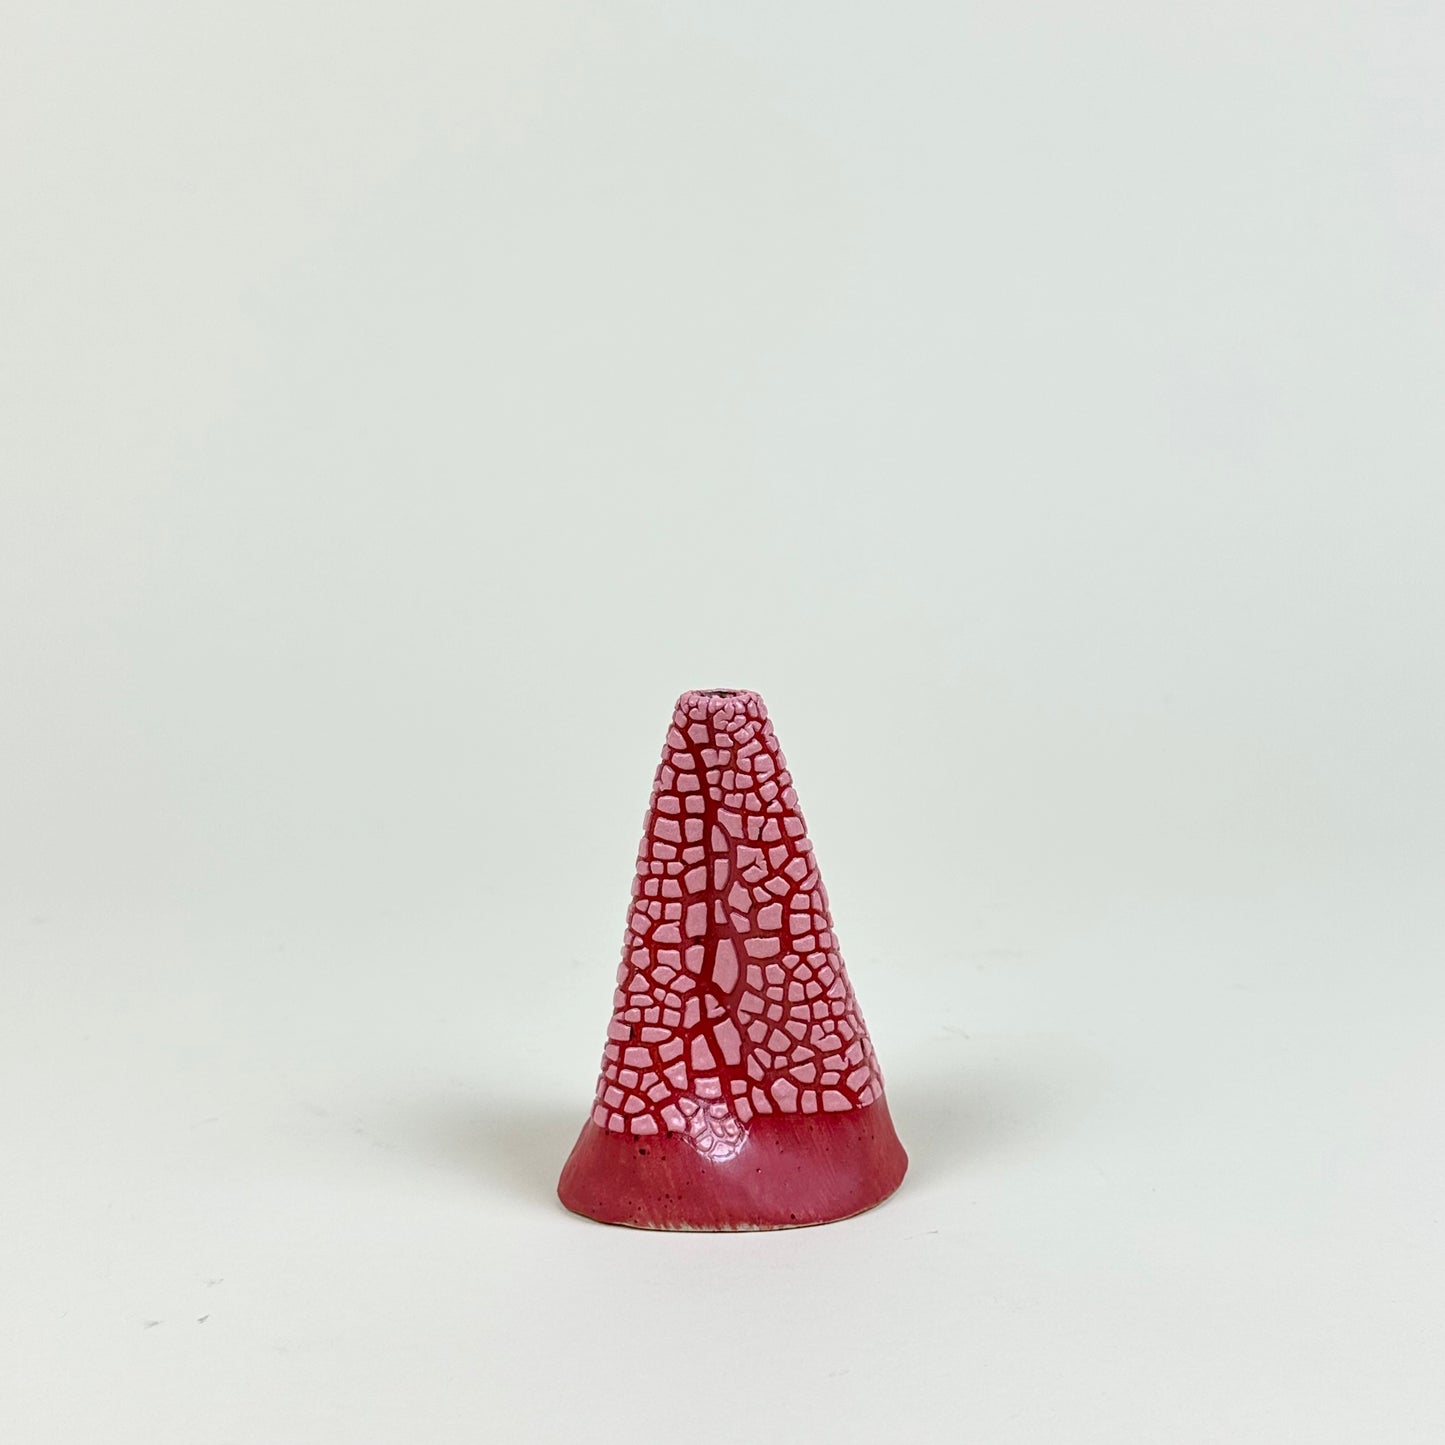 Red and pink volcano vase (S) by Astrid Öhman.